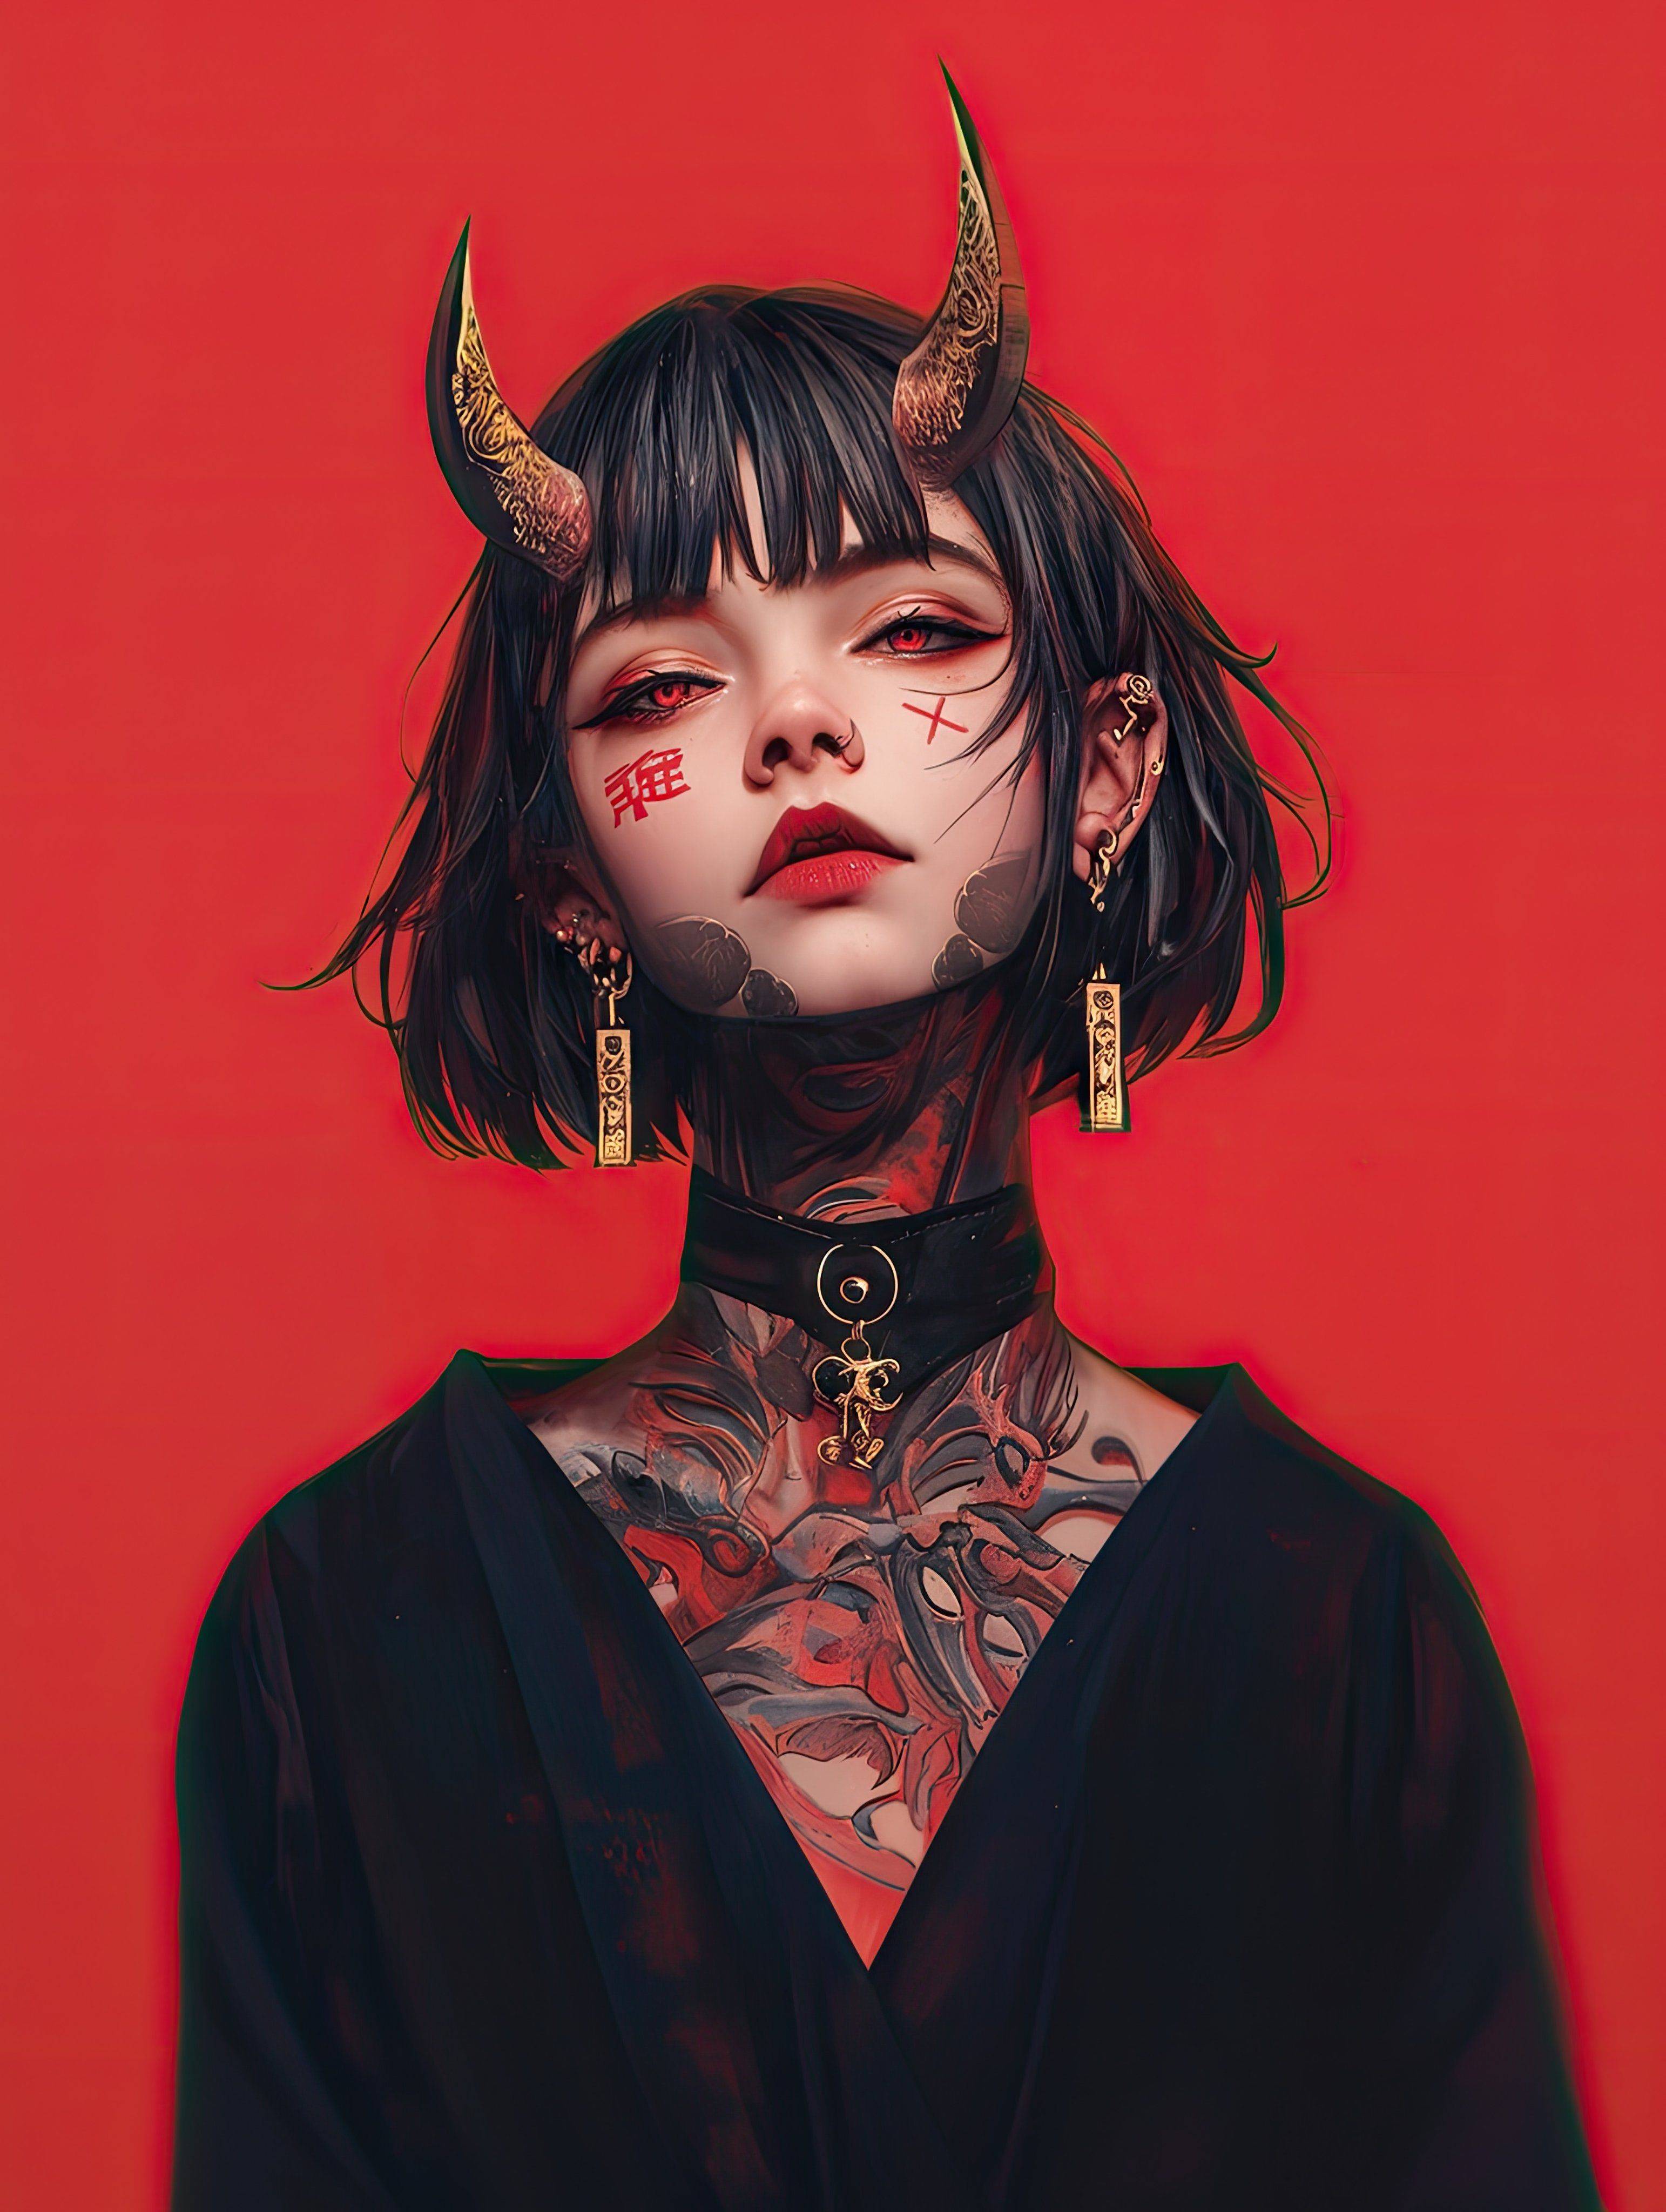 A girl with short hair and bangs with tattoos on her neck is wearing golden horns on her head against a red background, wearing black with high detail in the style of digital art, digital illustration, fantasy realism, fantasy concept art, full body portrait with a dark atmosphere, character design, character concept art in the style of anime-inspired character design, Asian aesthetics, Japanese manga, cyberpunk, 2D game art, concept art.